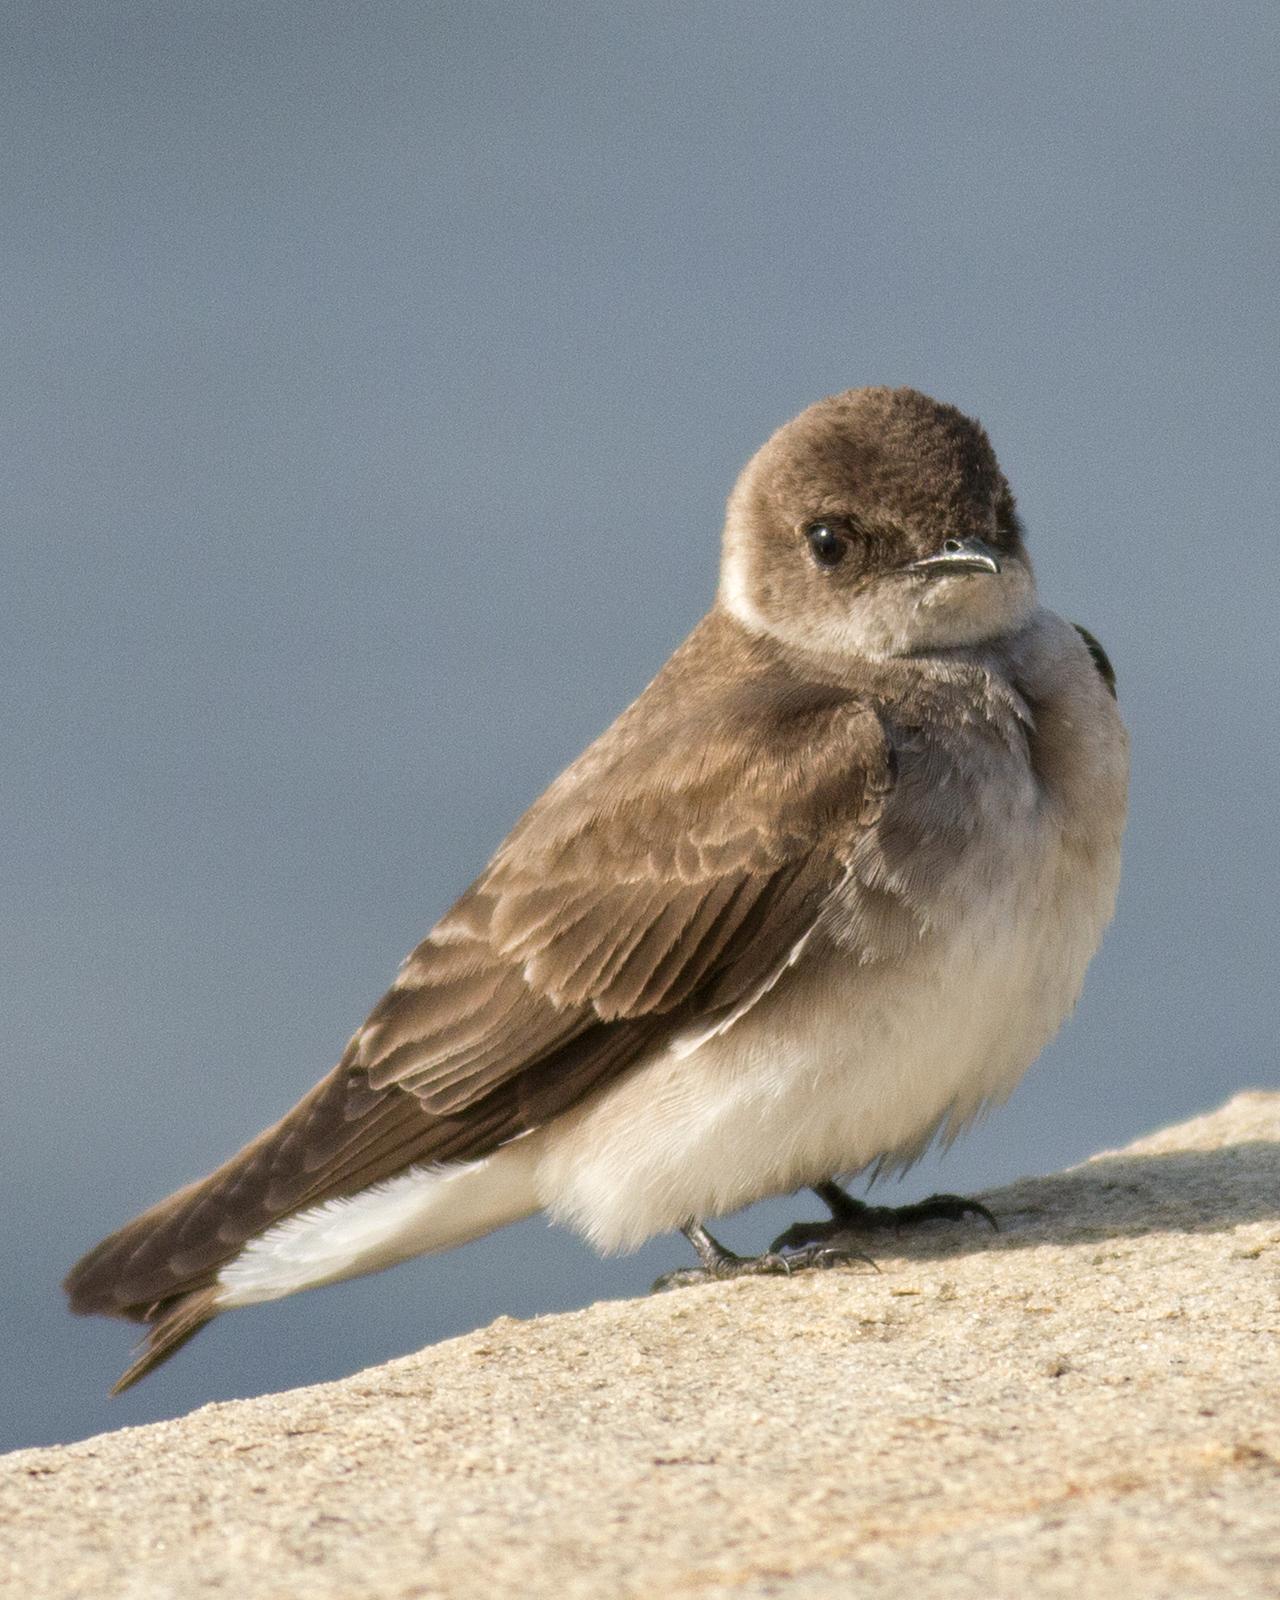 Northern Rough-winged Swallow Photo by Joshua Jones